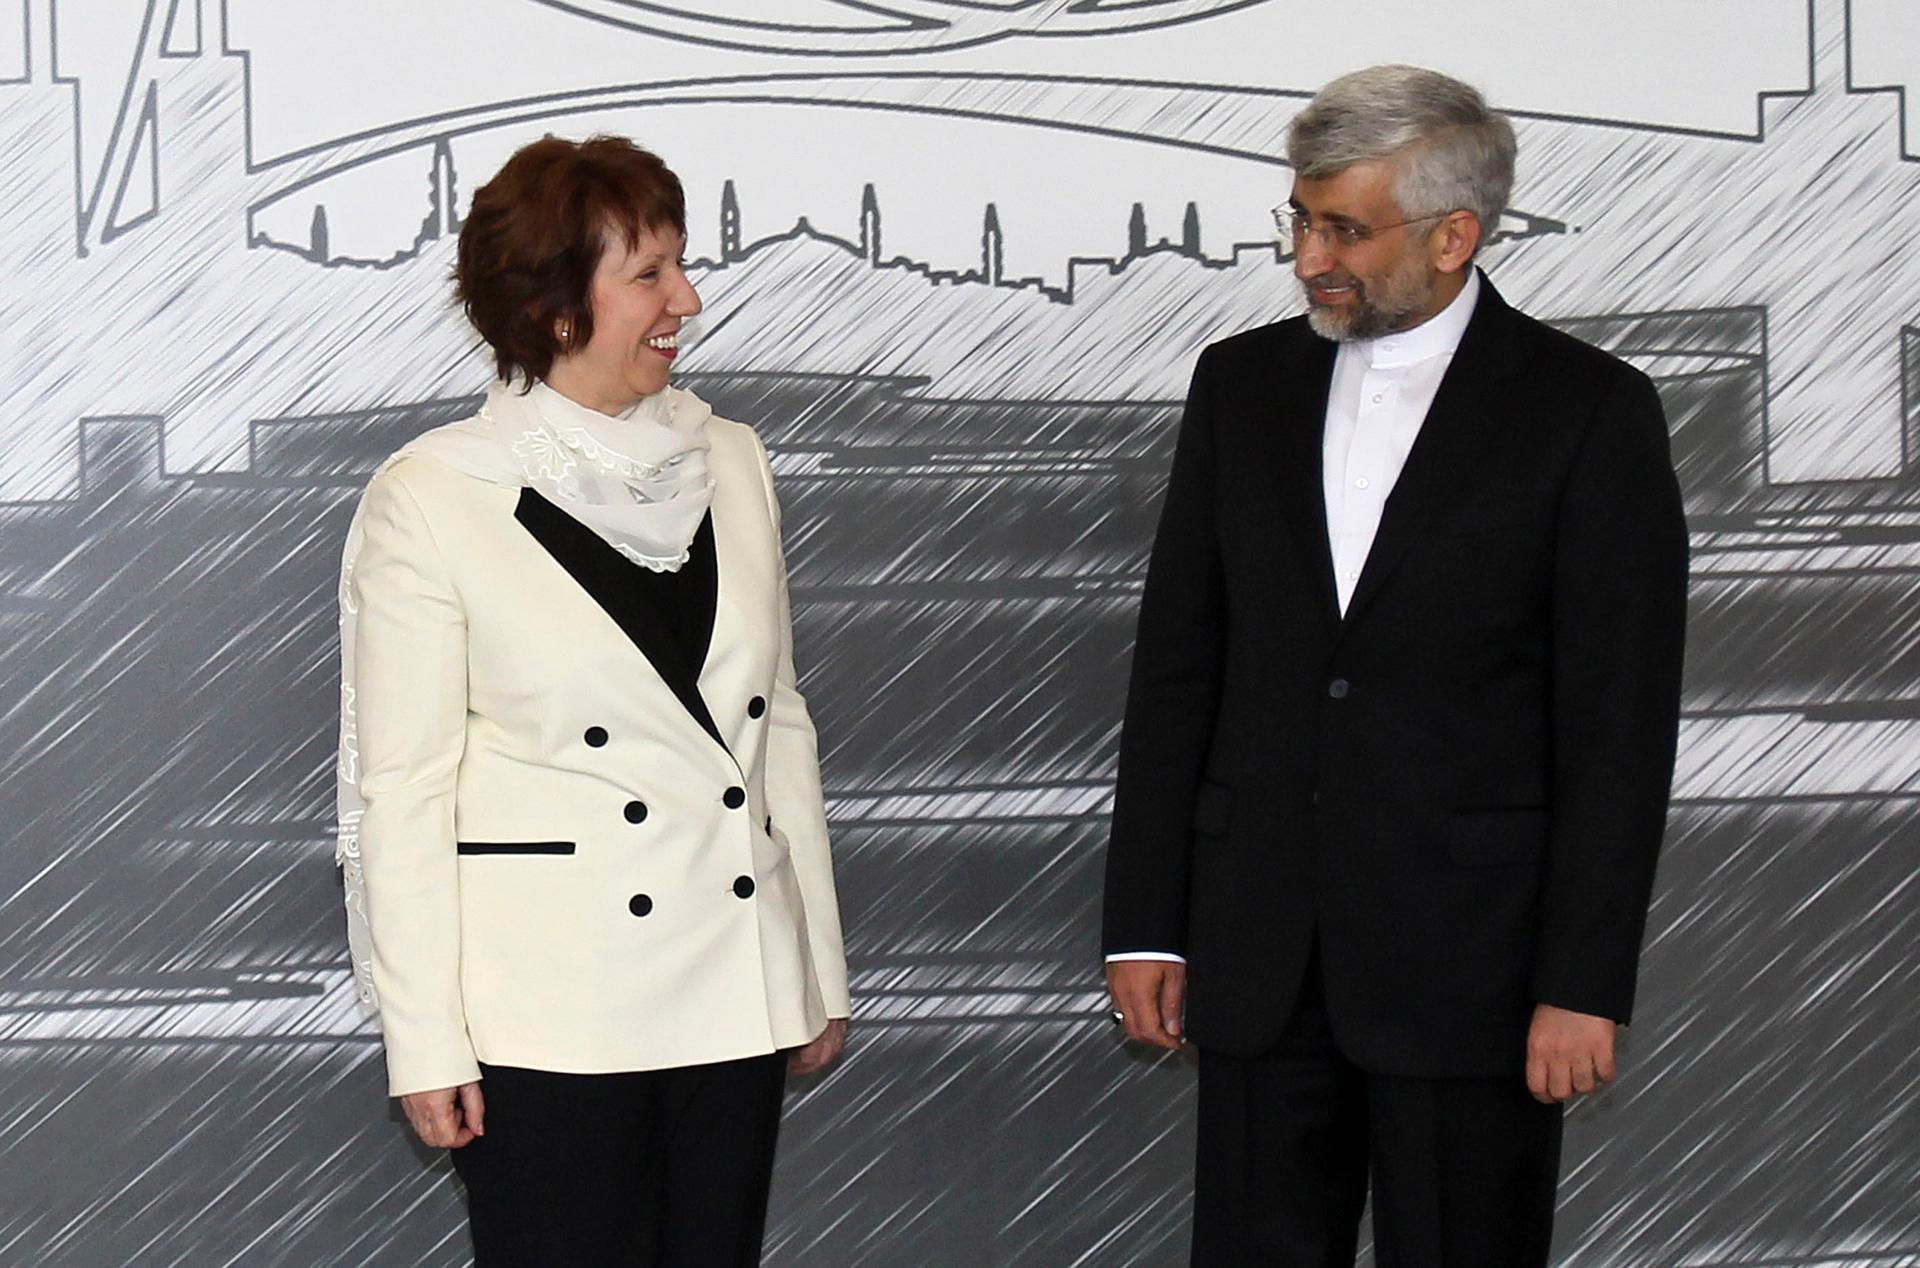 European Union foreign policy chief Catherine Ashton (L) and Iran's chief negotiator Saeed Jalili in Istanbul April 14, 2012 